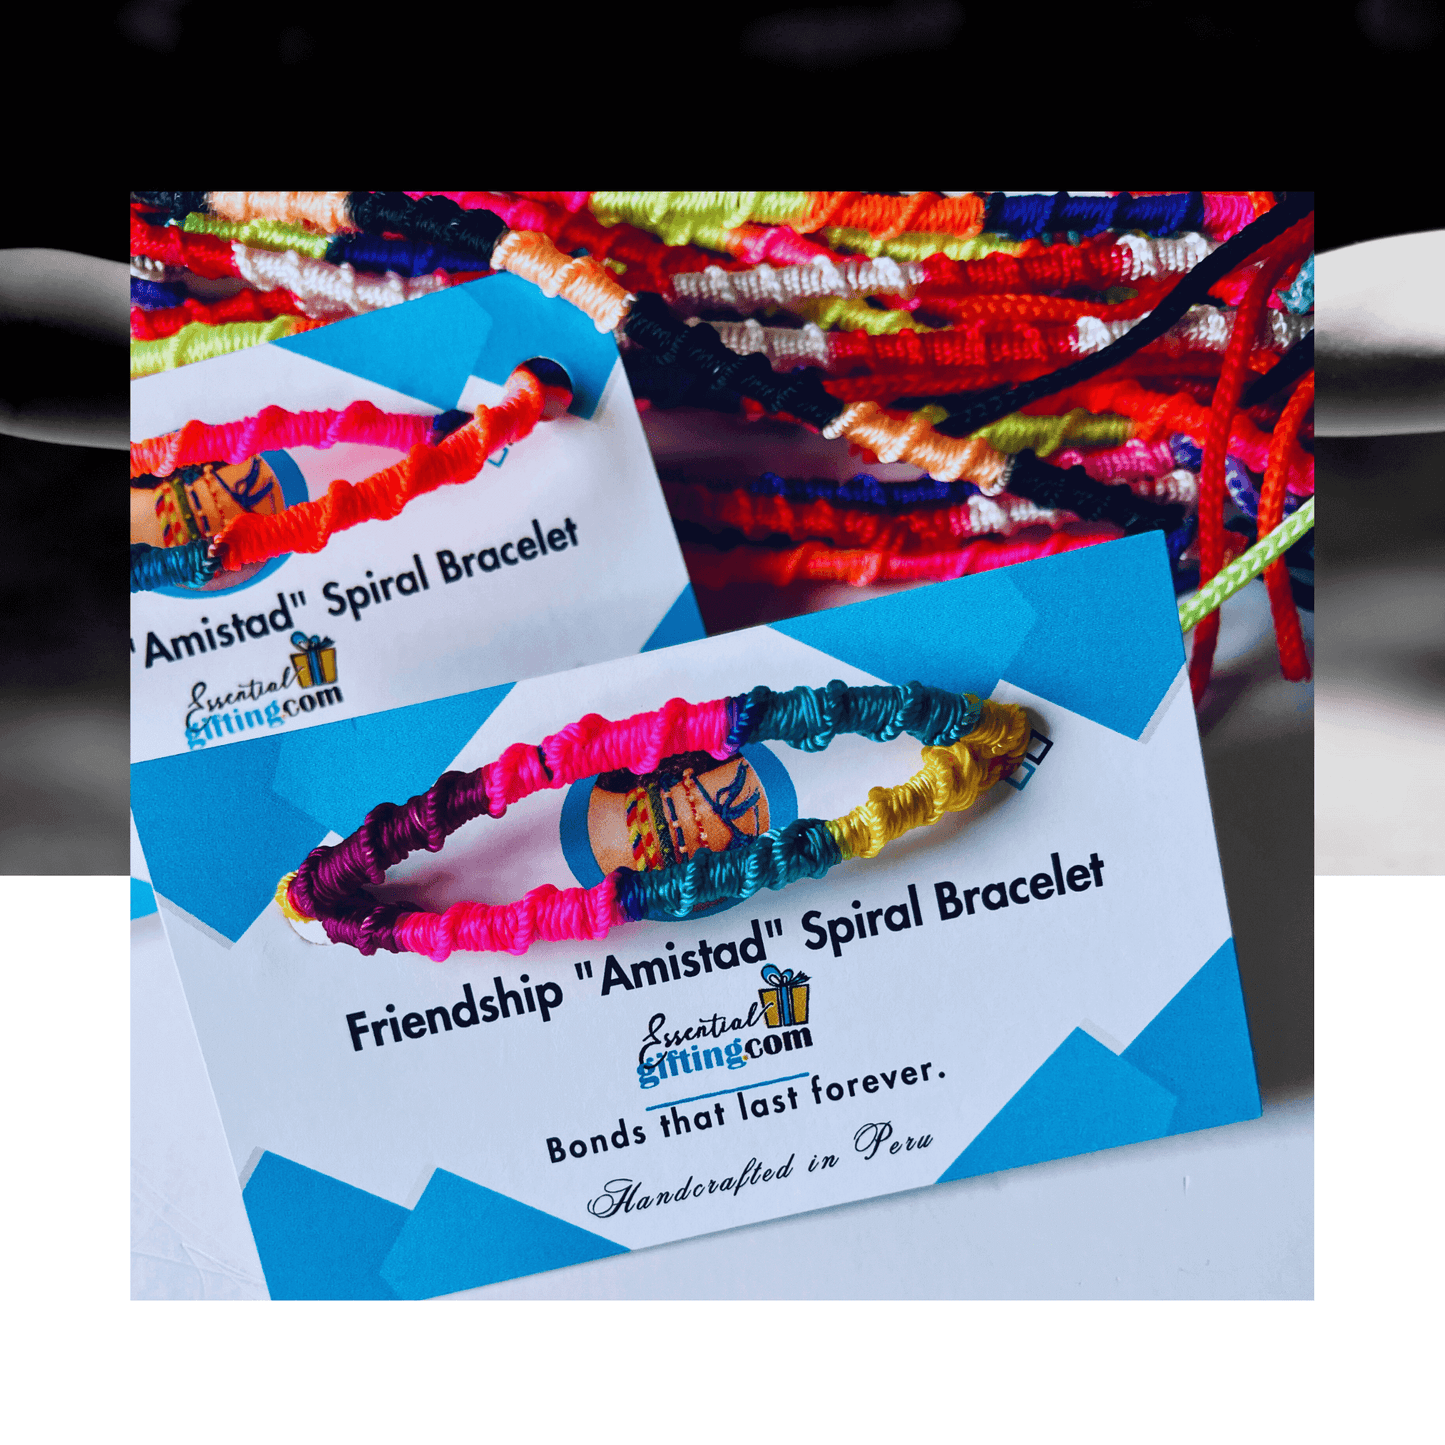 Vibrant friendship bracelets on colorful background. Spiral bracelet design with charming "Amistid" branding. Party favors for girls and friends.